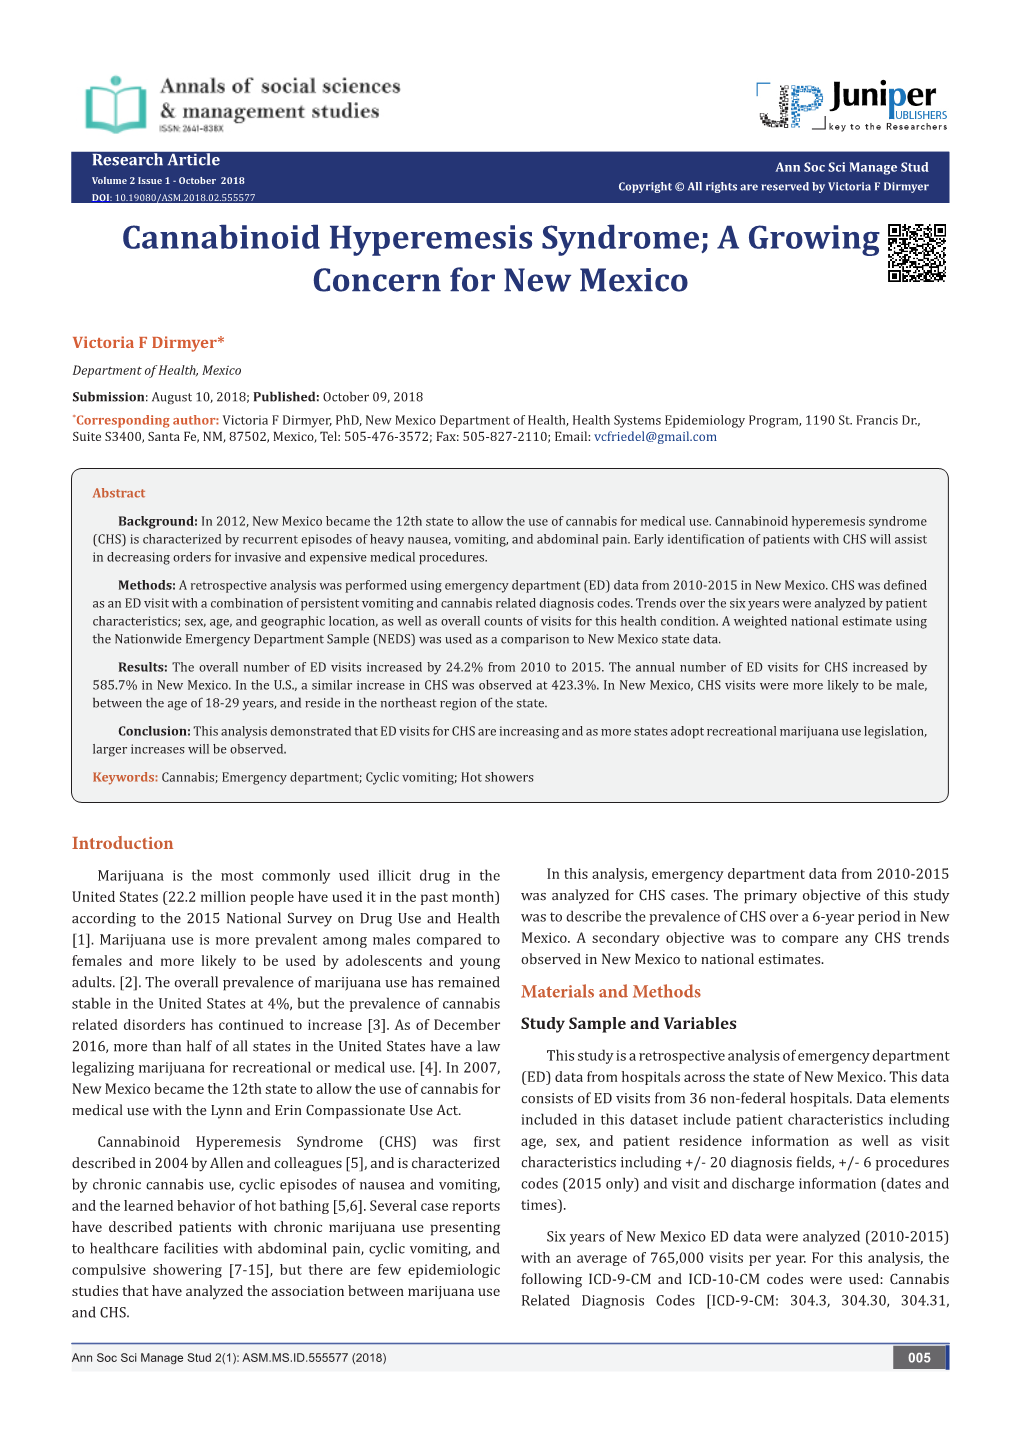 Cannabinoid Hyperemesis Syndrome; a Growing Concern for New Mexico